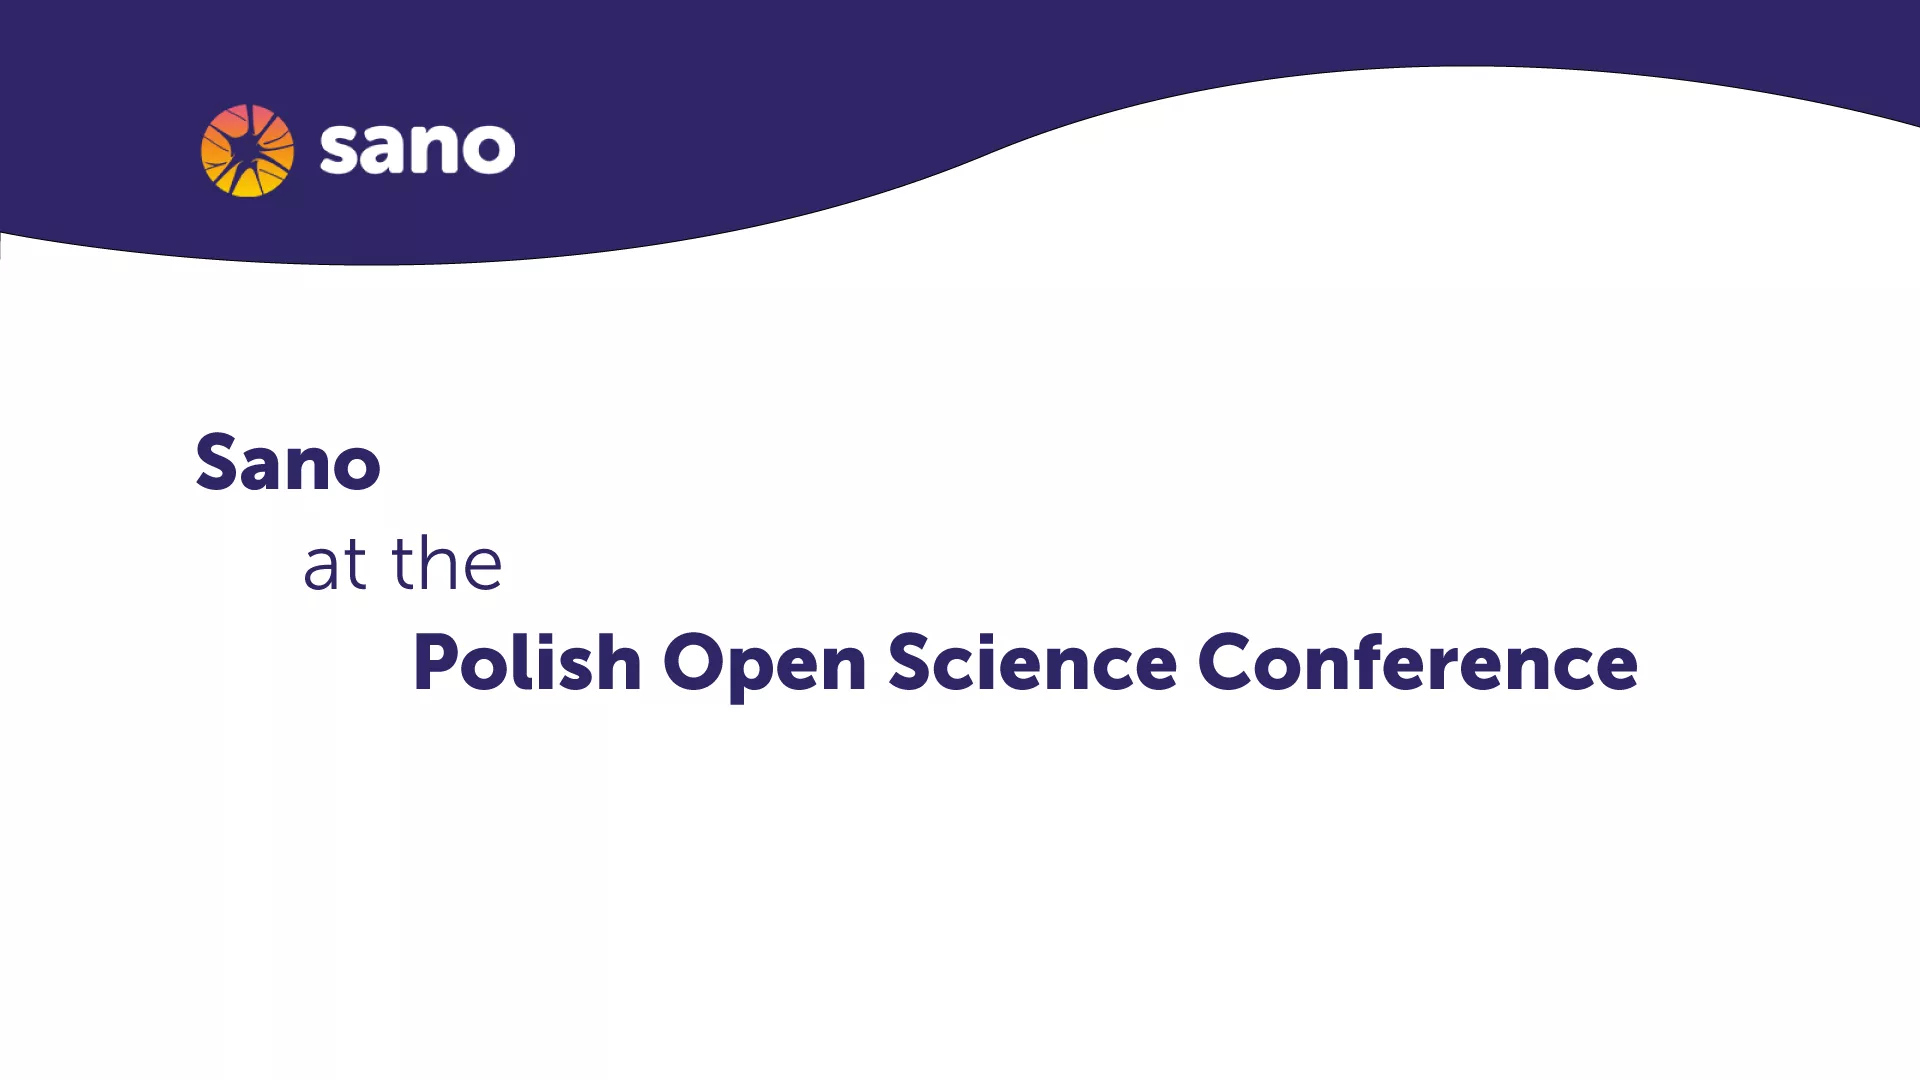 Sano at the Polish Open Science Conference